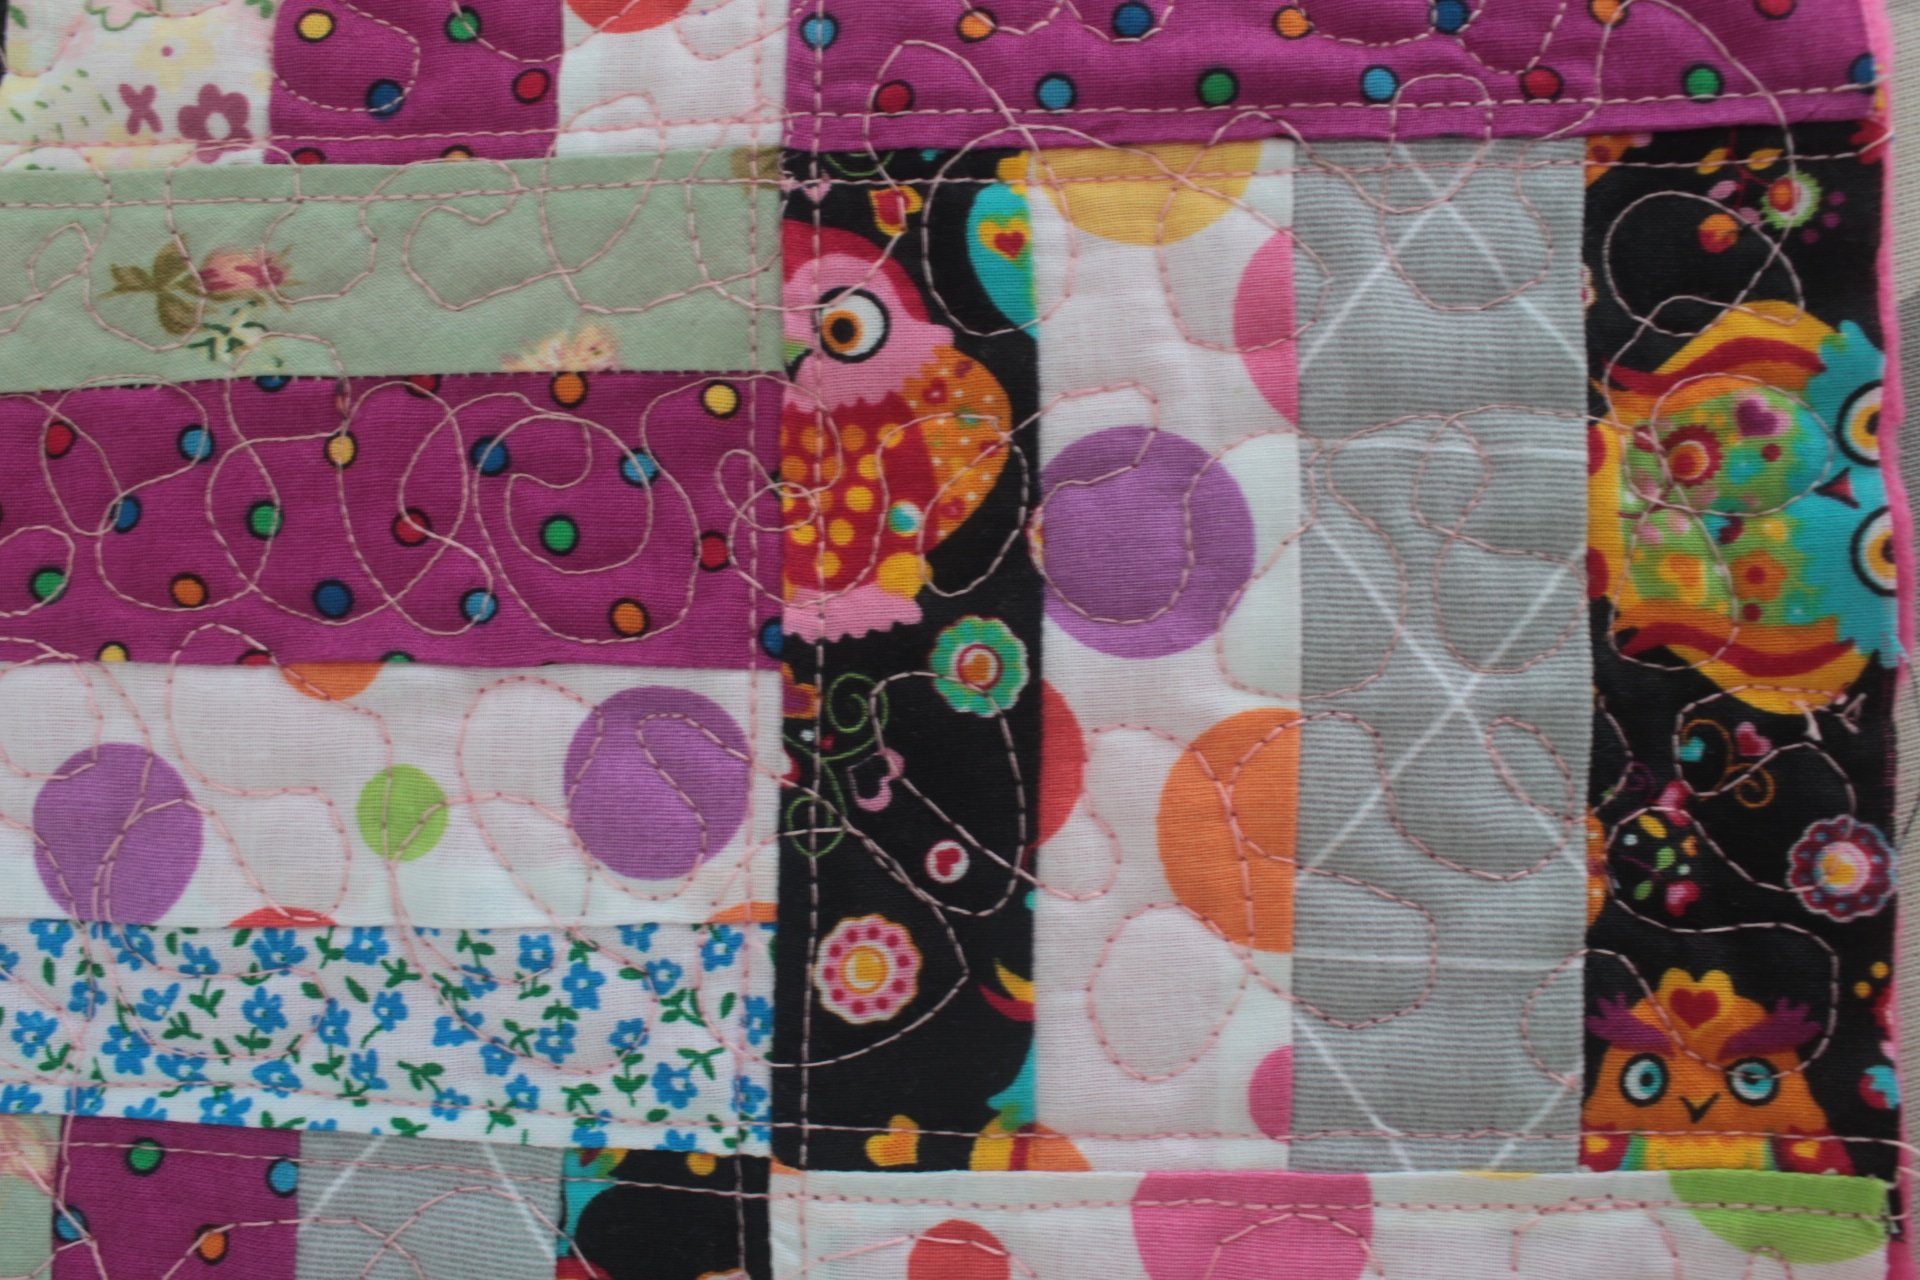 Quilted Snap Bag Tutorial From Small Fabric Scraps